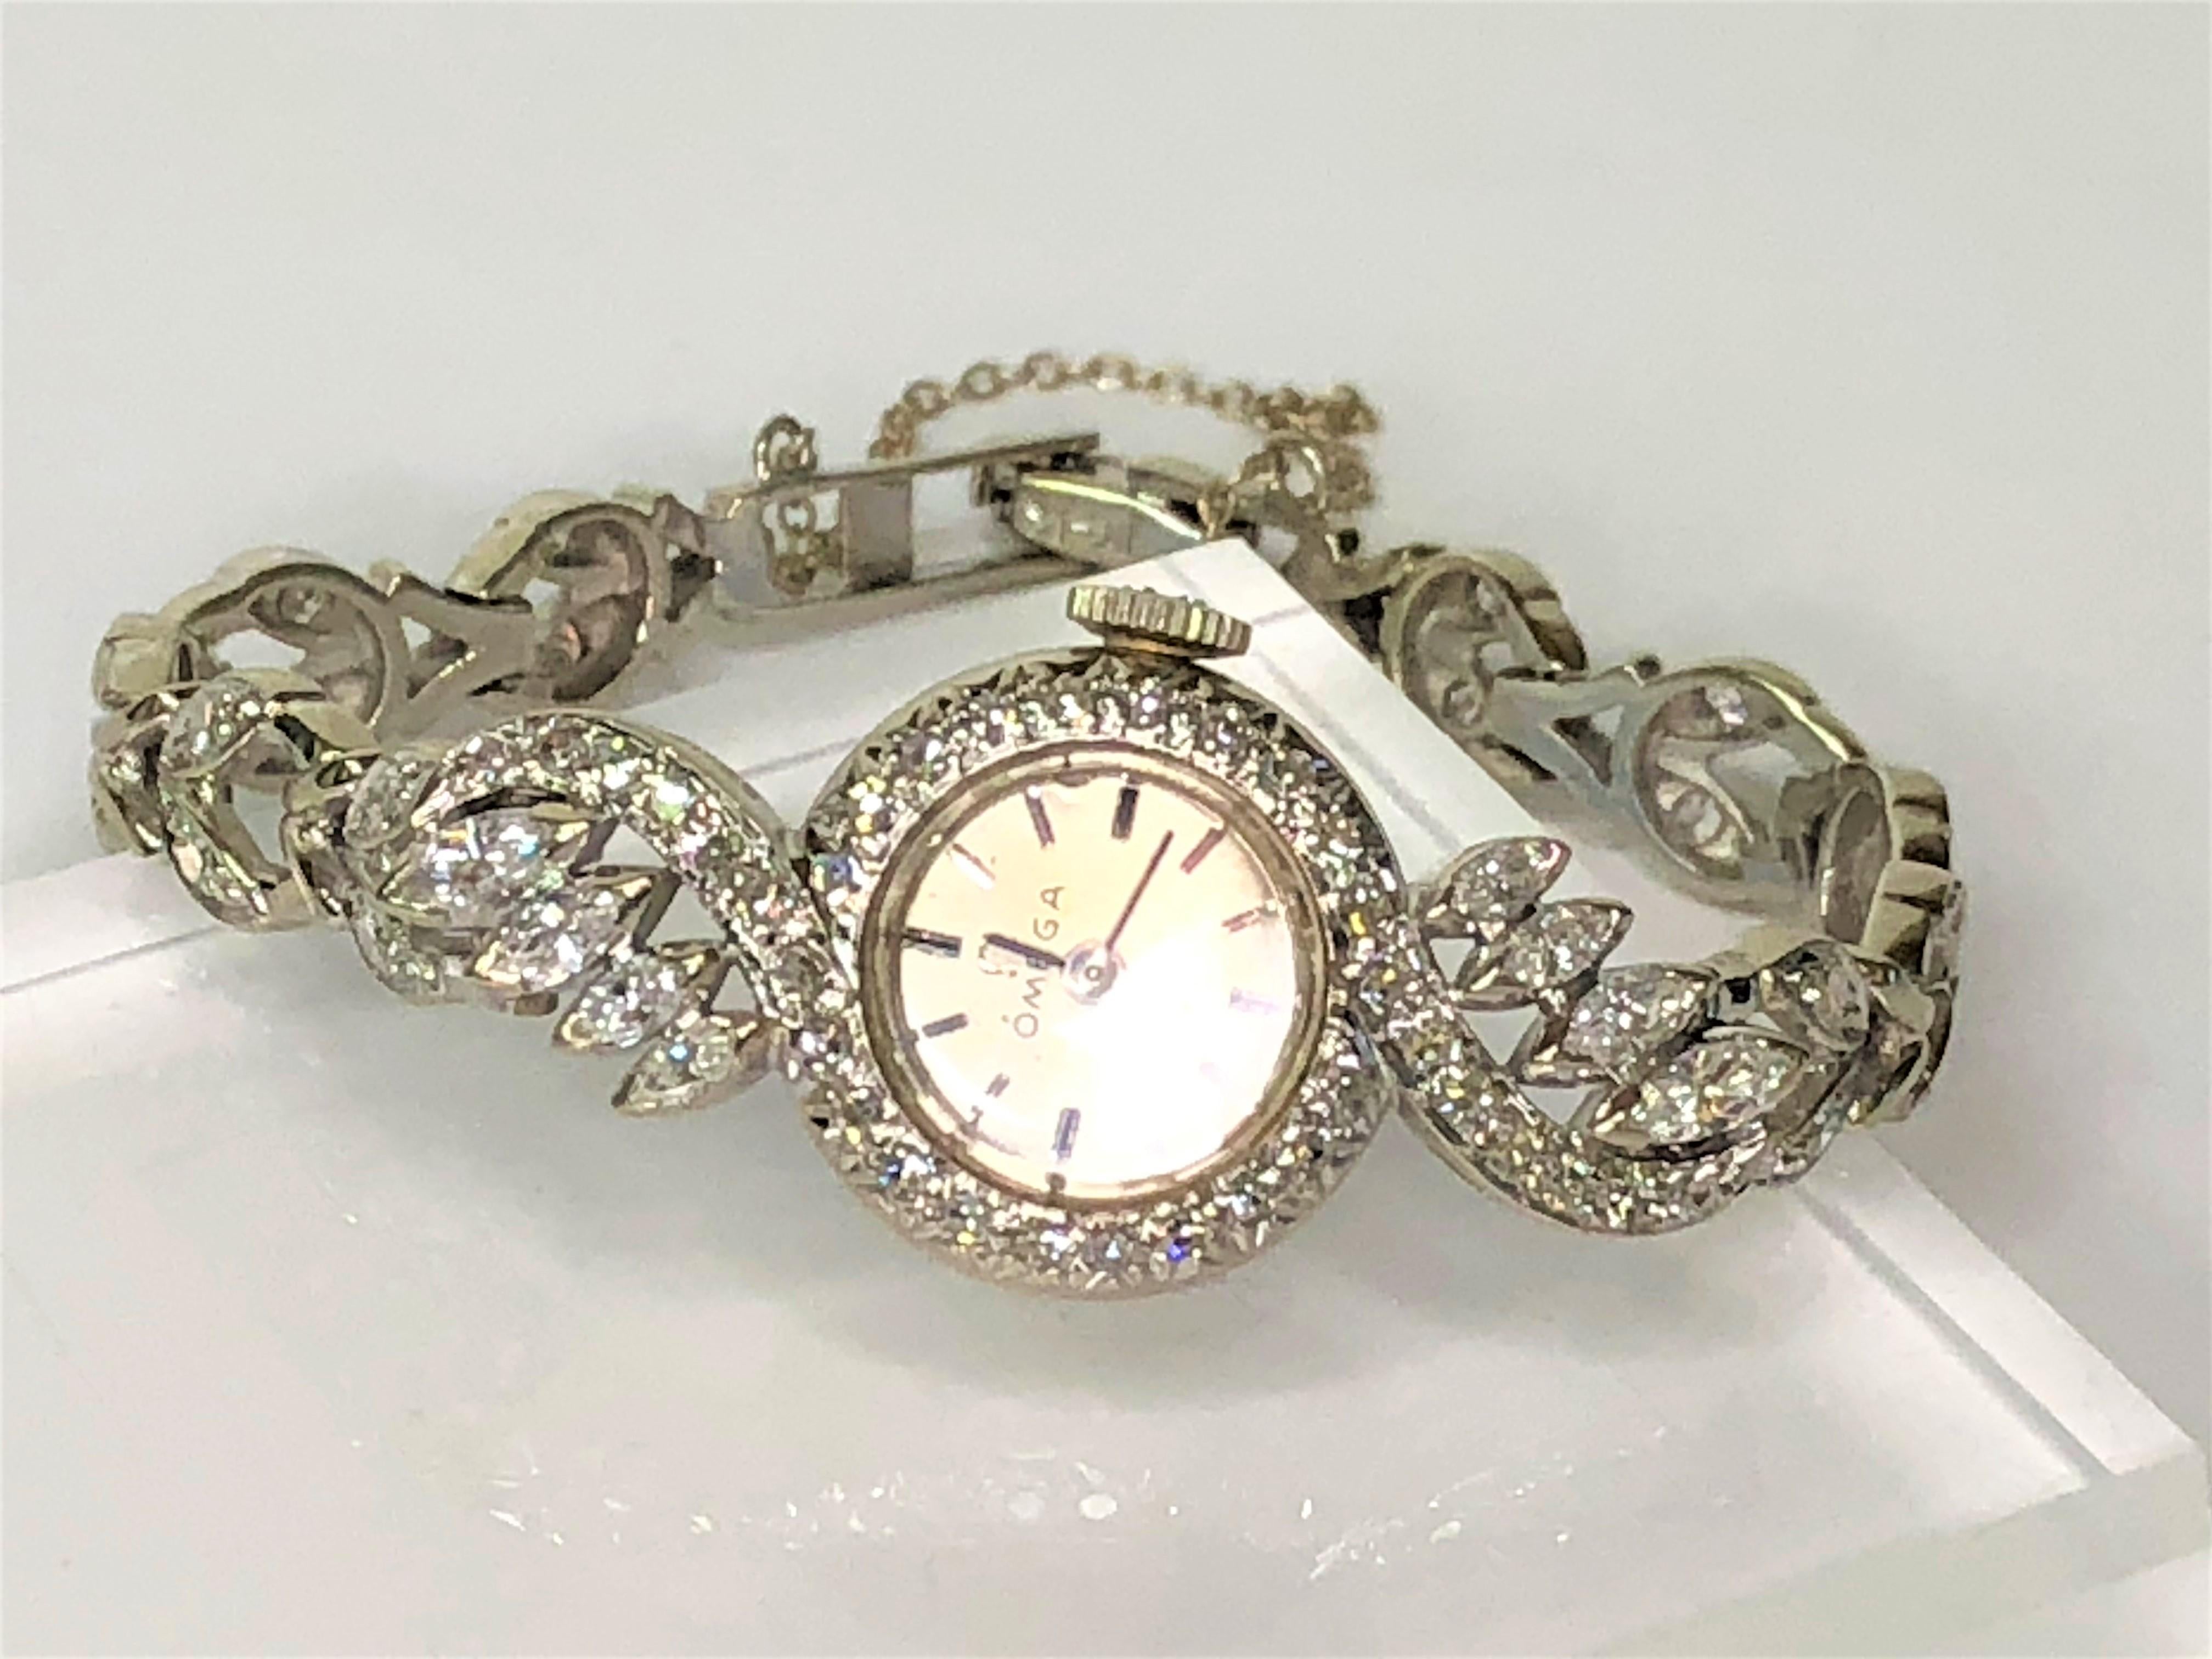 This intricate Omega watch sparkles from across the room.  Beautiful, unique design makes this watch a must have!
14 karat white gold
Approximately 1.20 total diamond weight
34 round single cut diamonds, approximately .34tdw, and 8 marquise